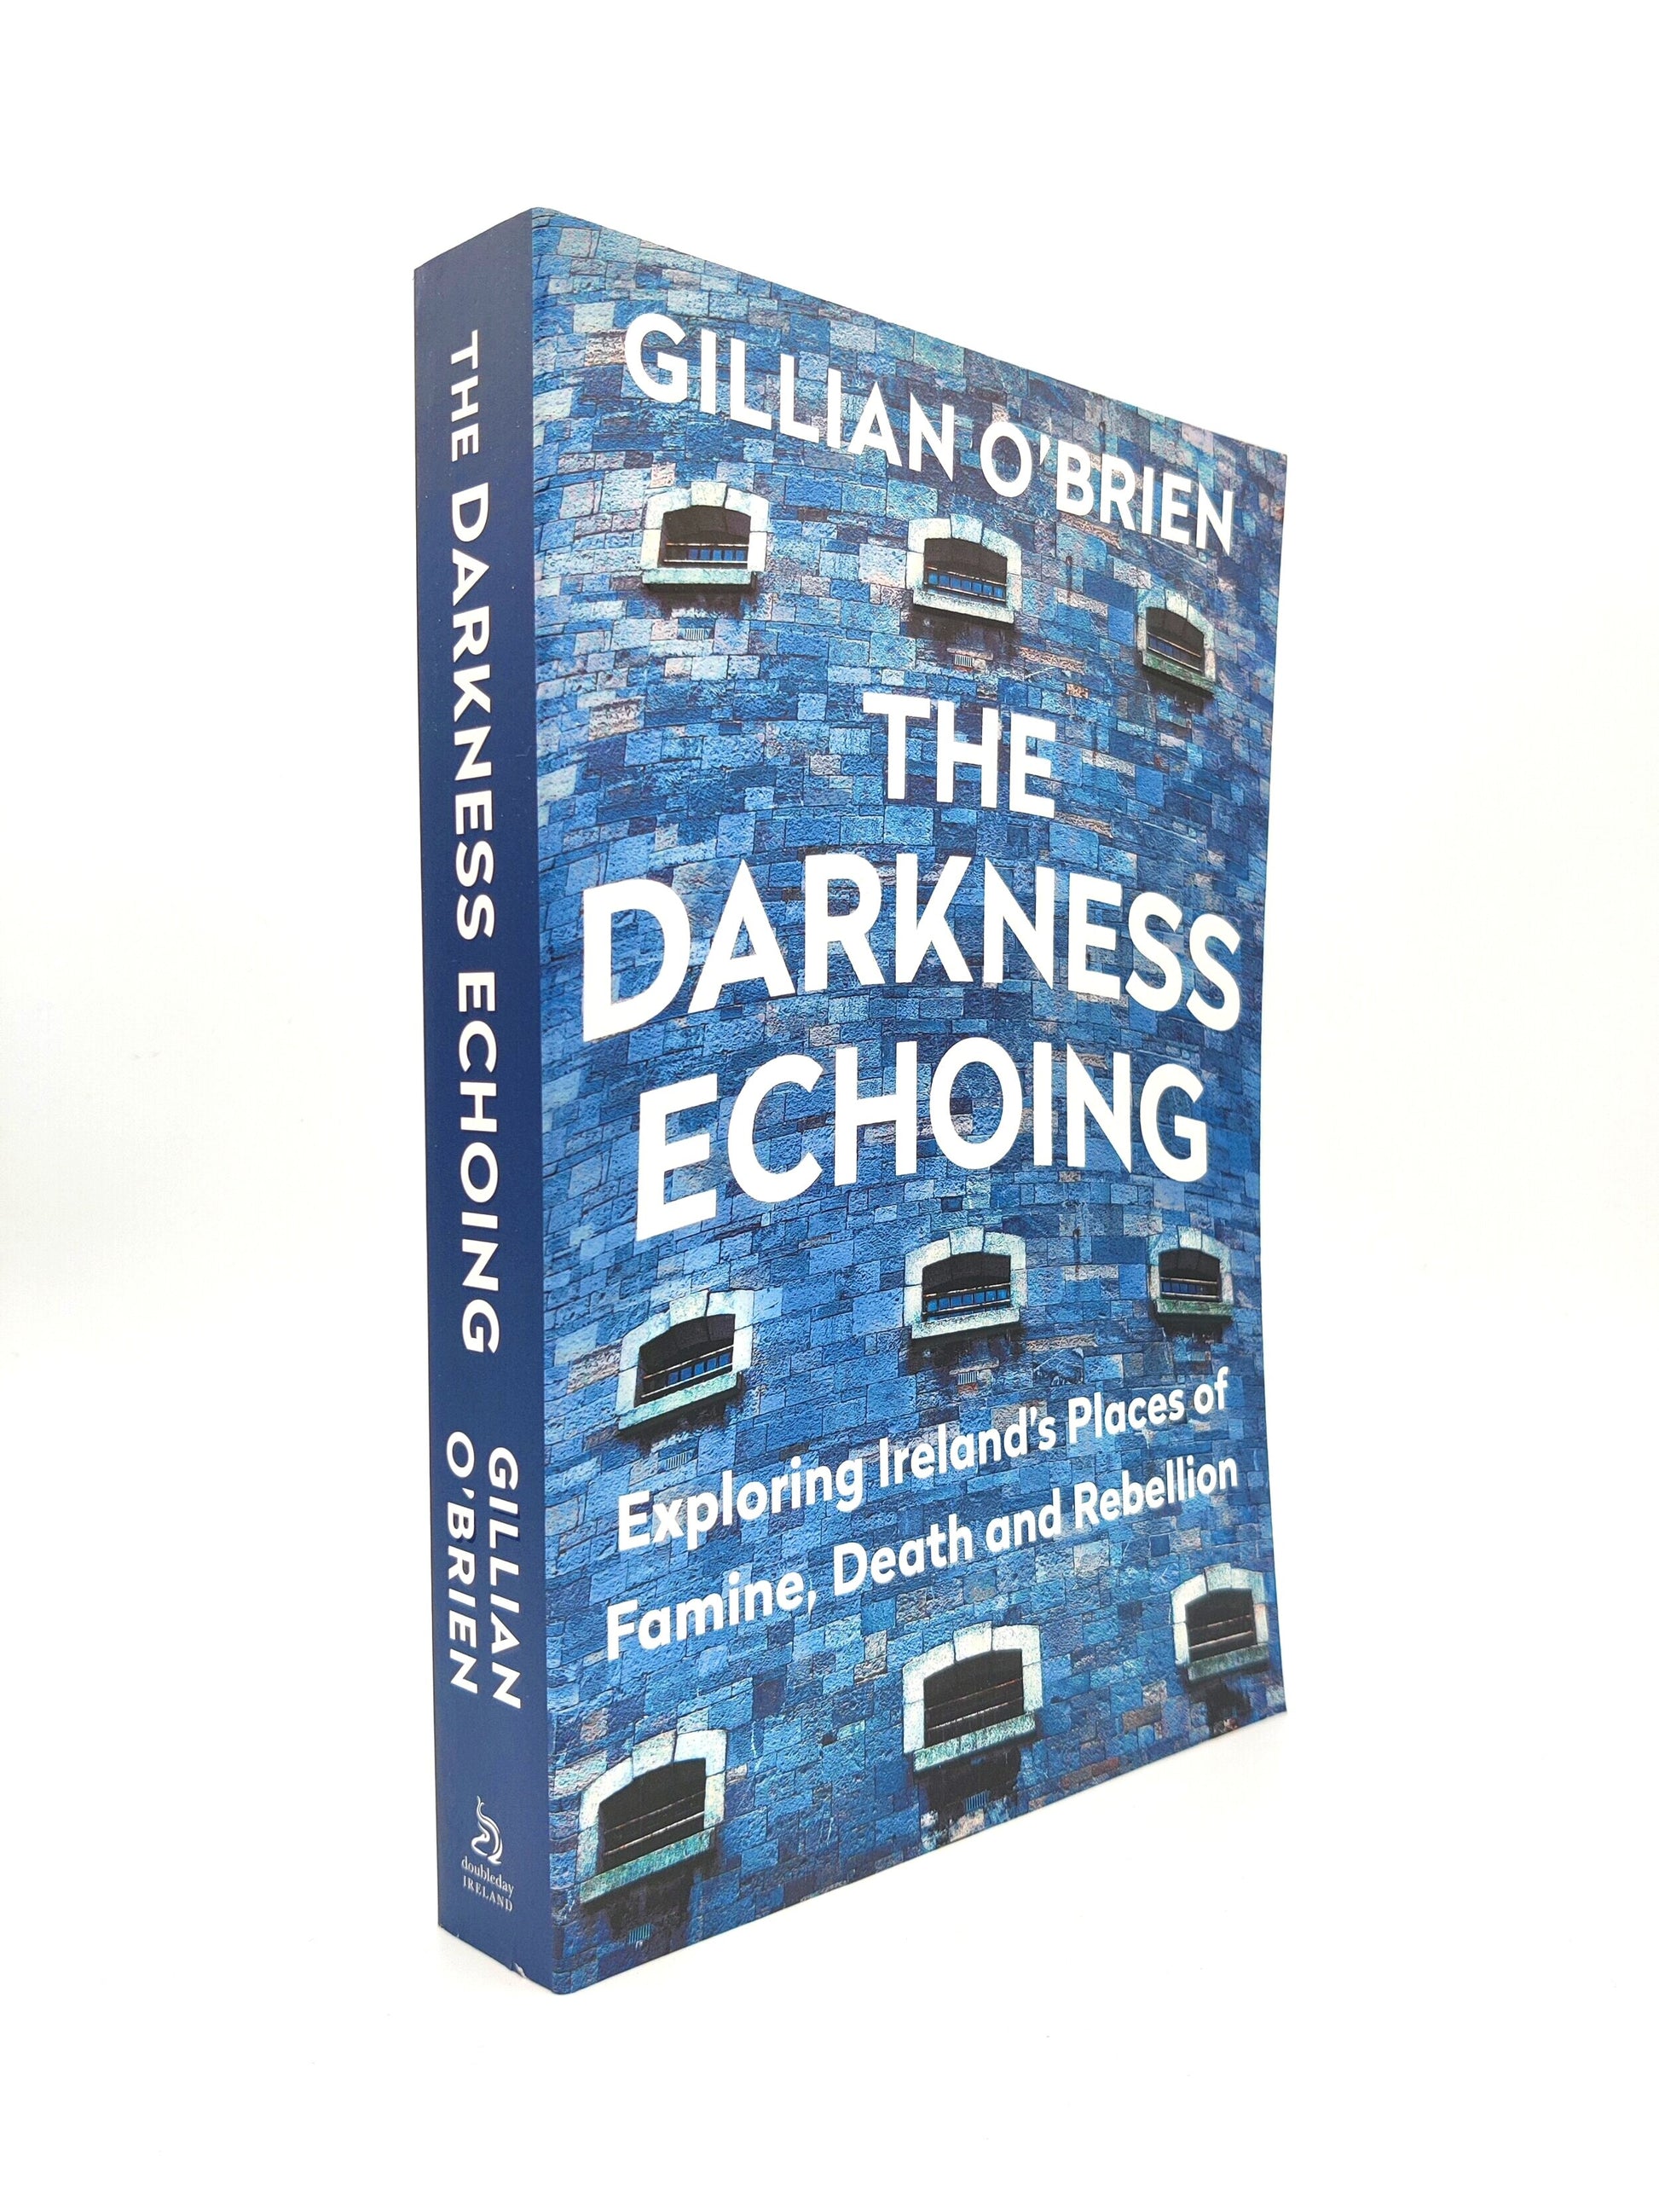 The Darkness Echoing: Exploring Ireland's Places of Famine, Death and Rebellion Paperback Book